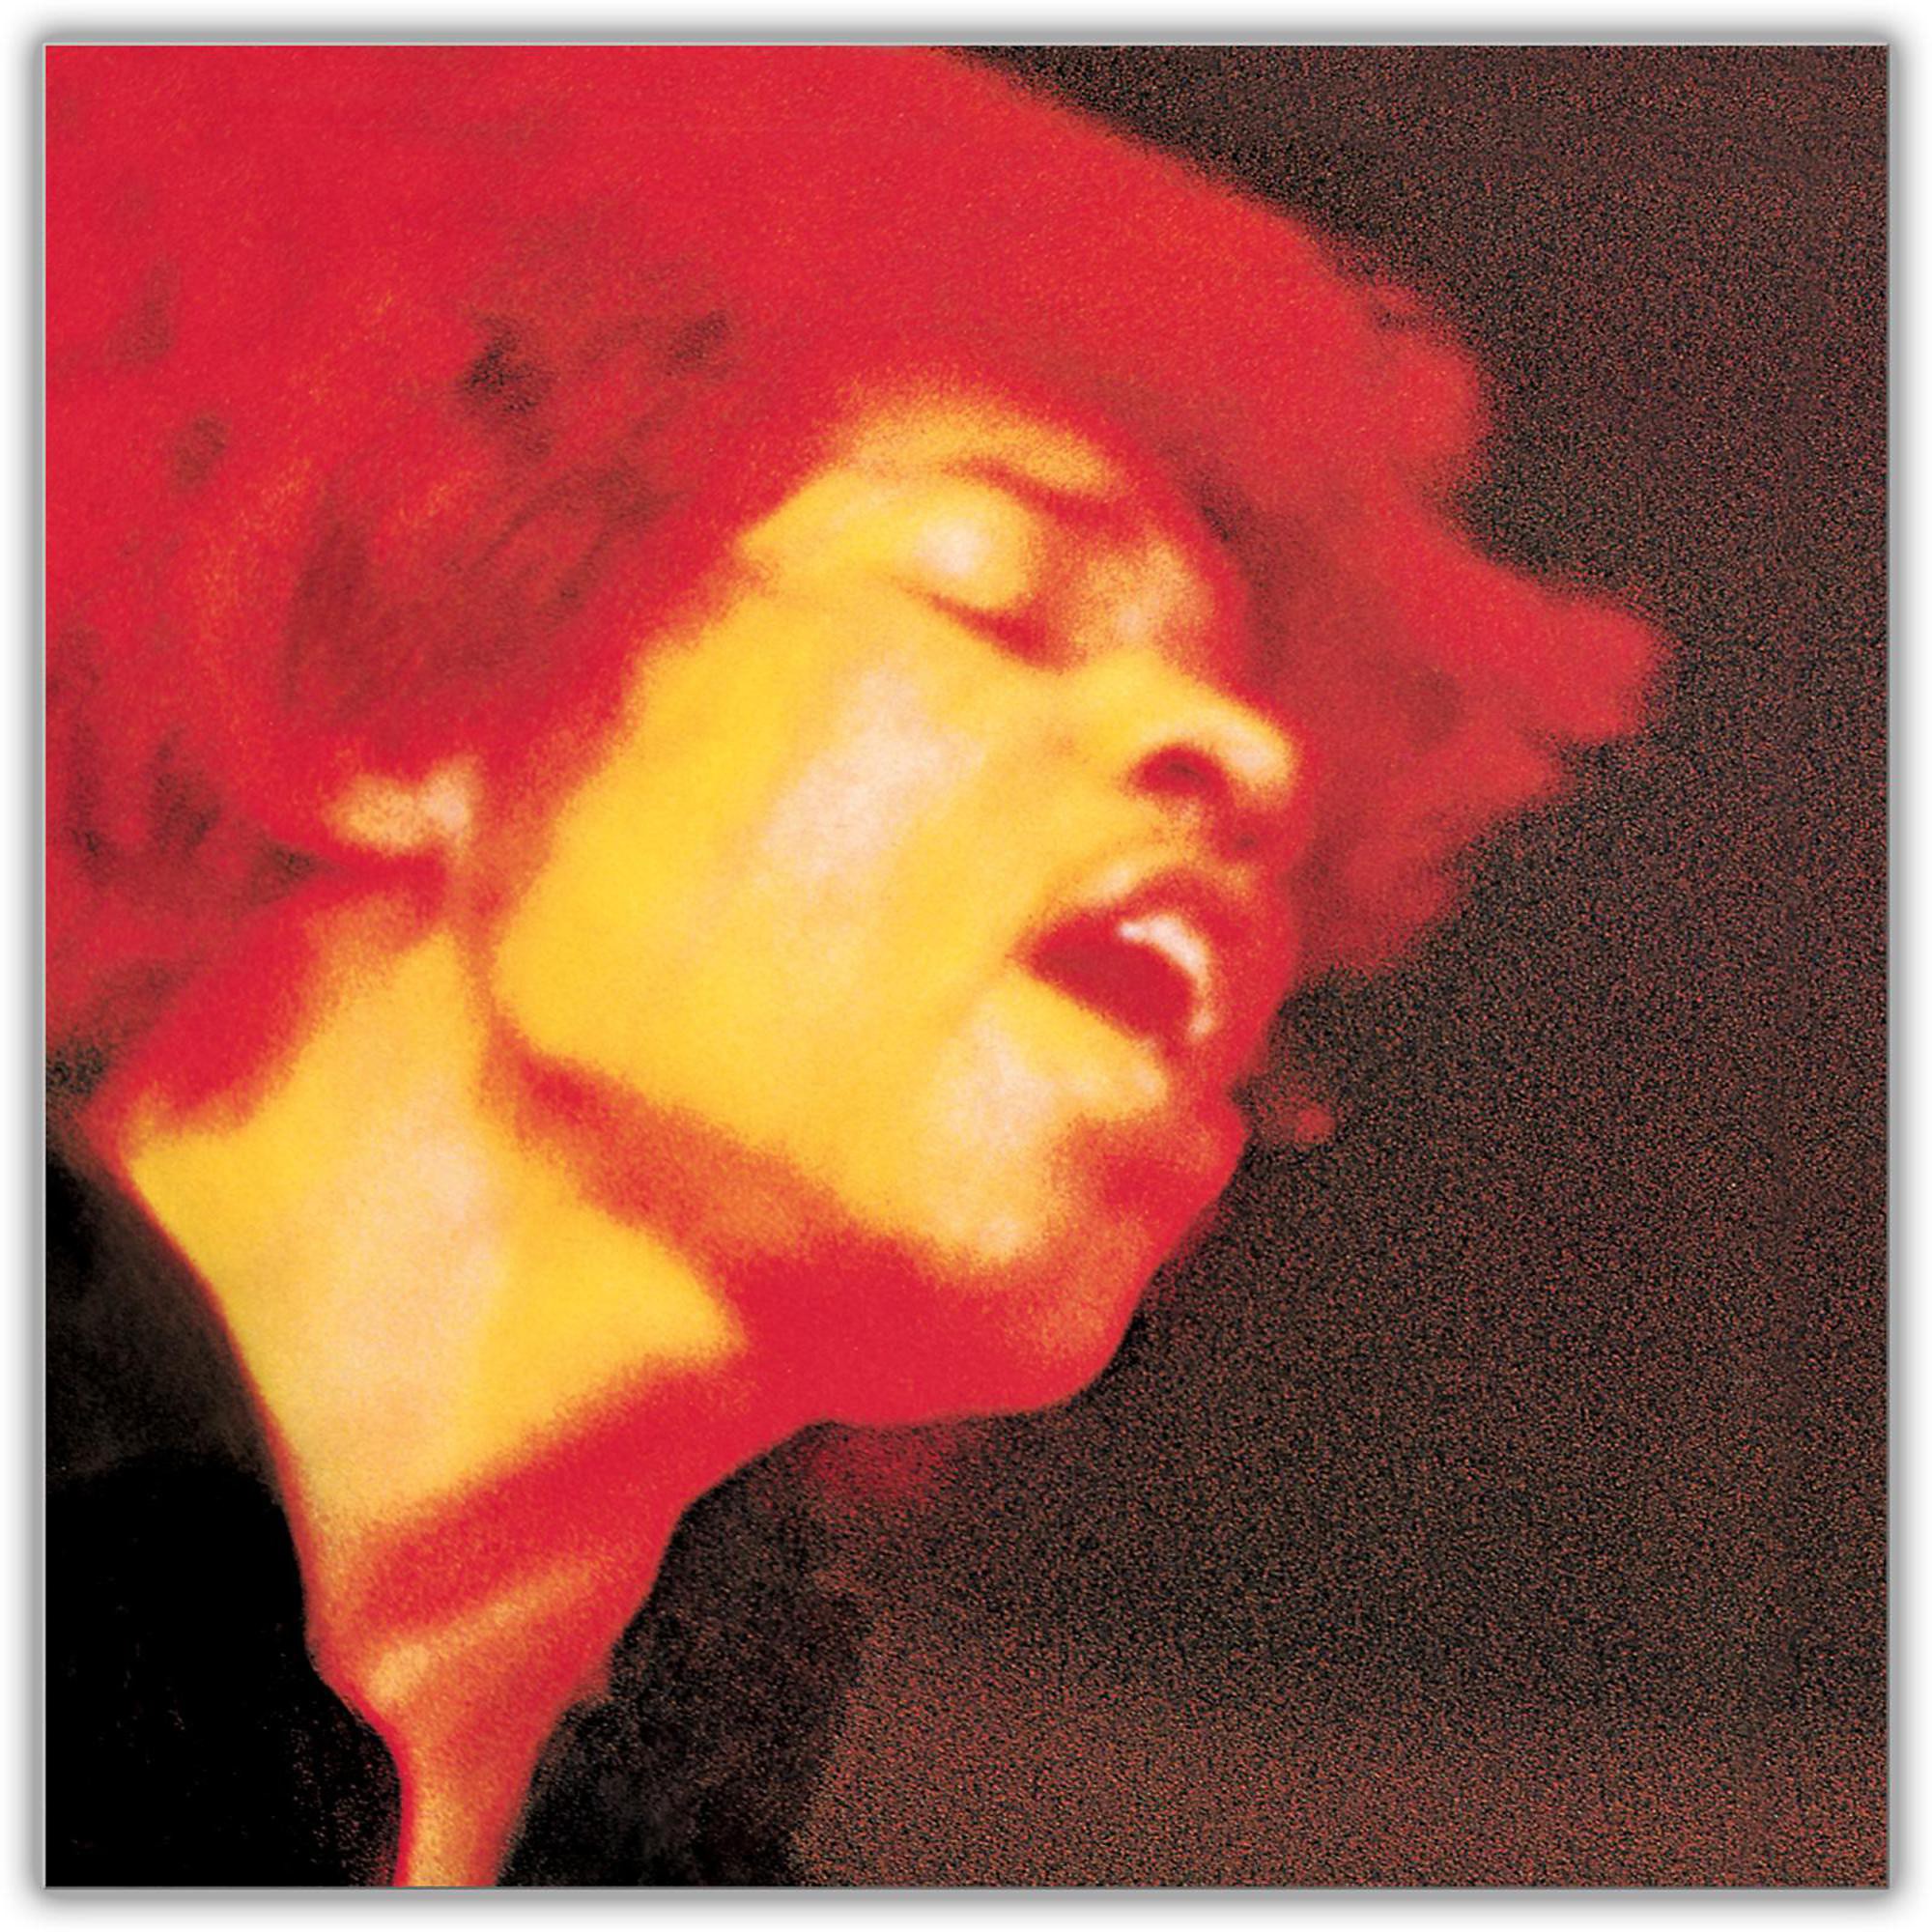 jimi hendrix experience electric ladyland